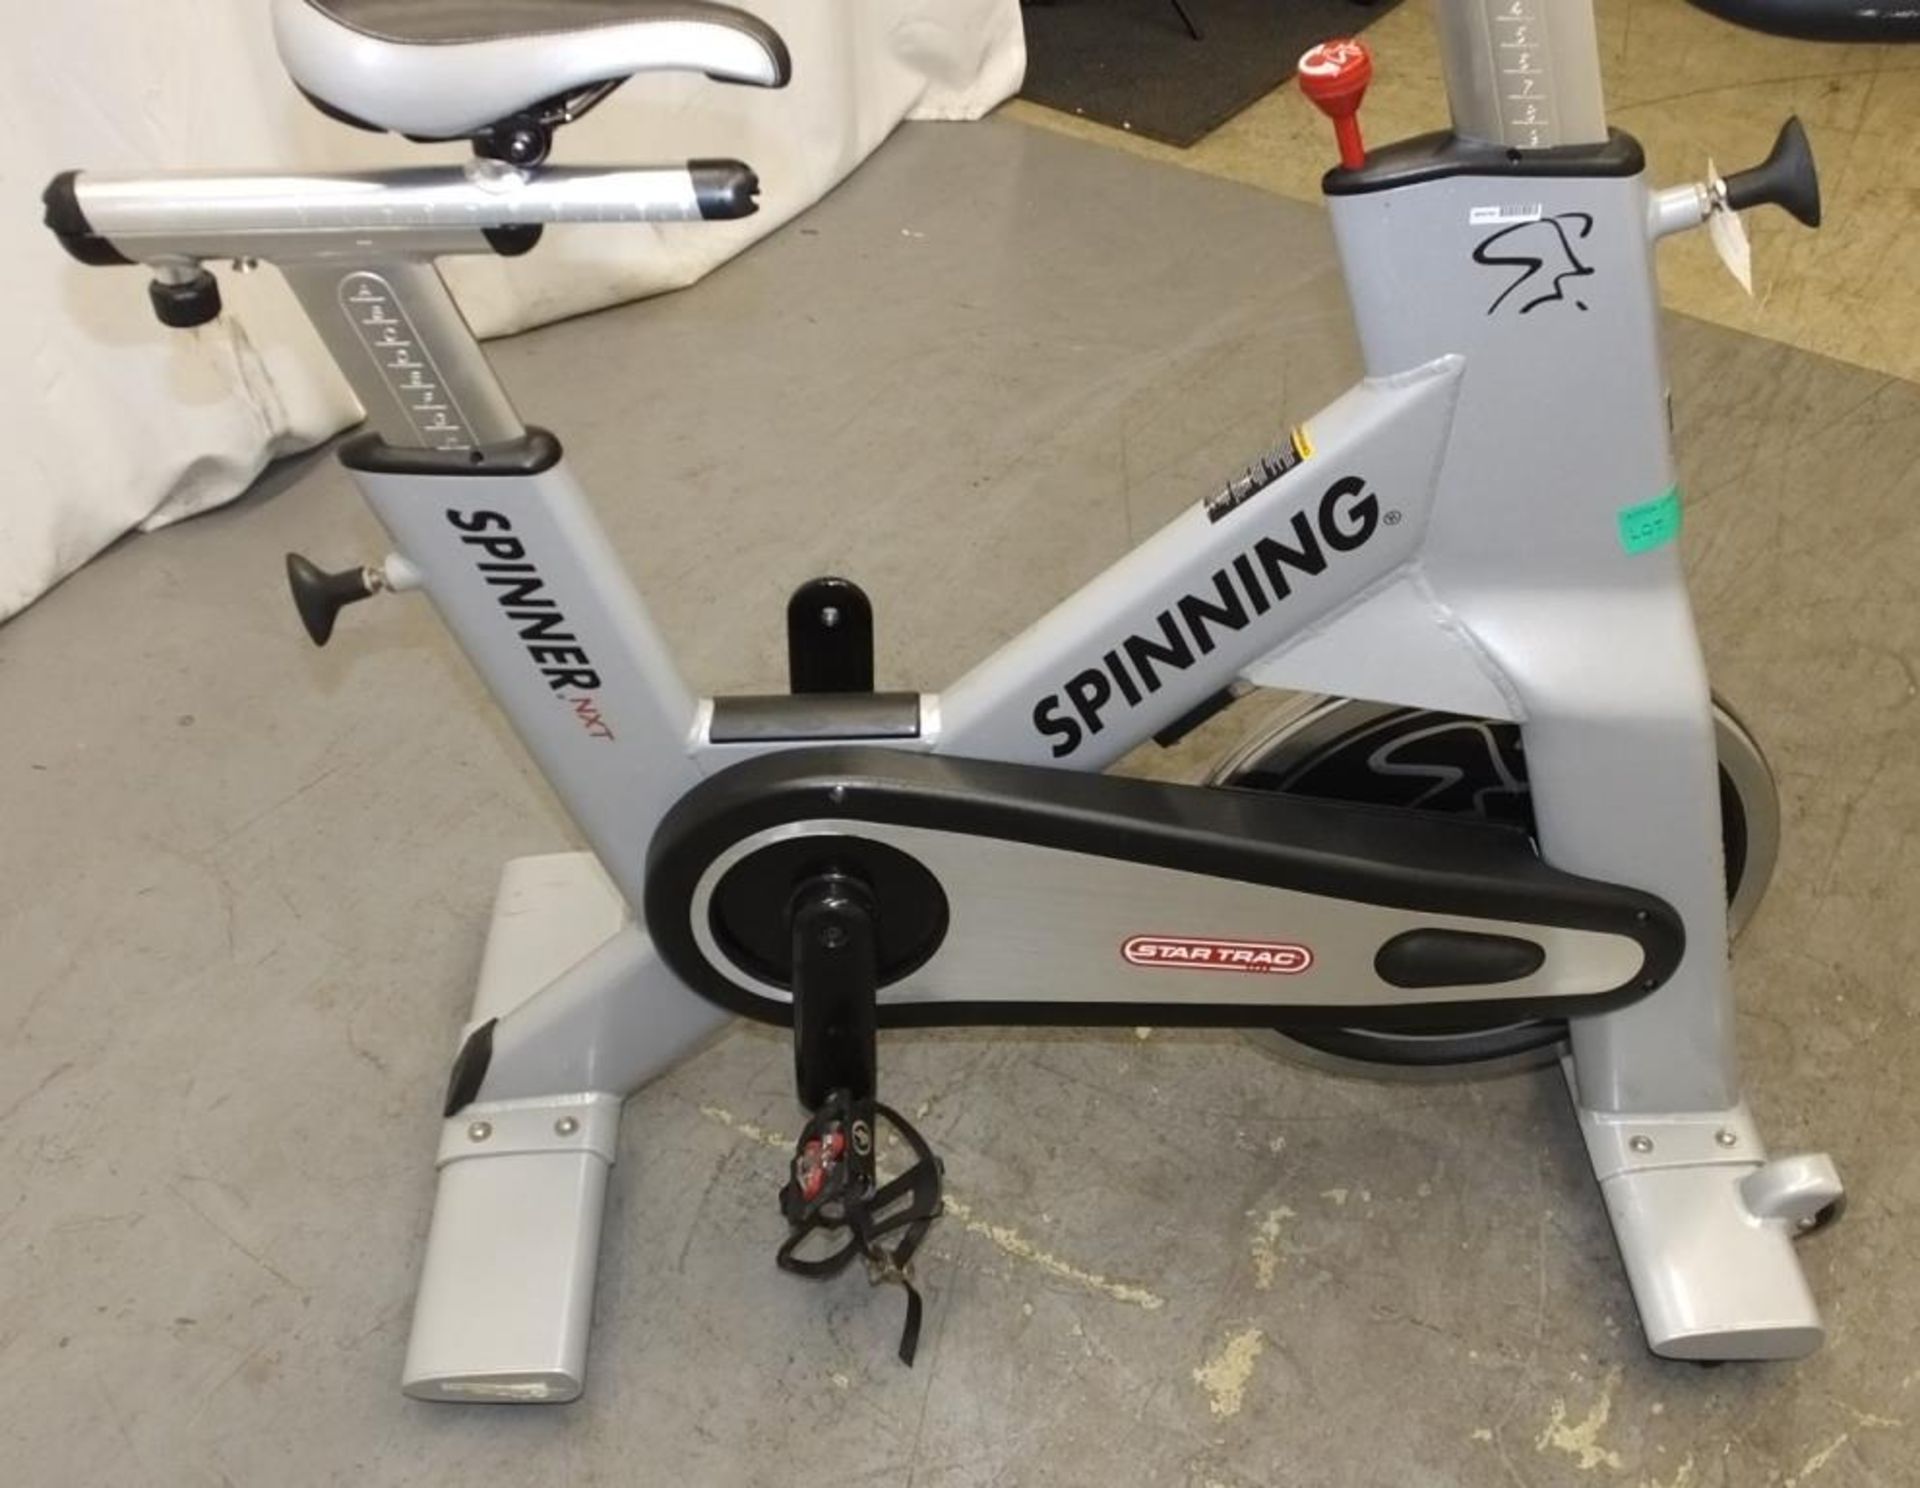 Startrac Spinner NXT Spin Bike - missing pedal - console powers up - functionality untested - Image 3 of 6